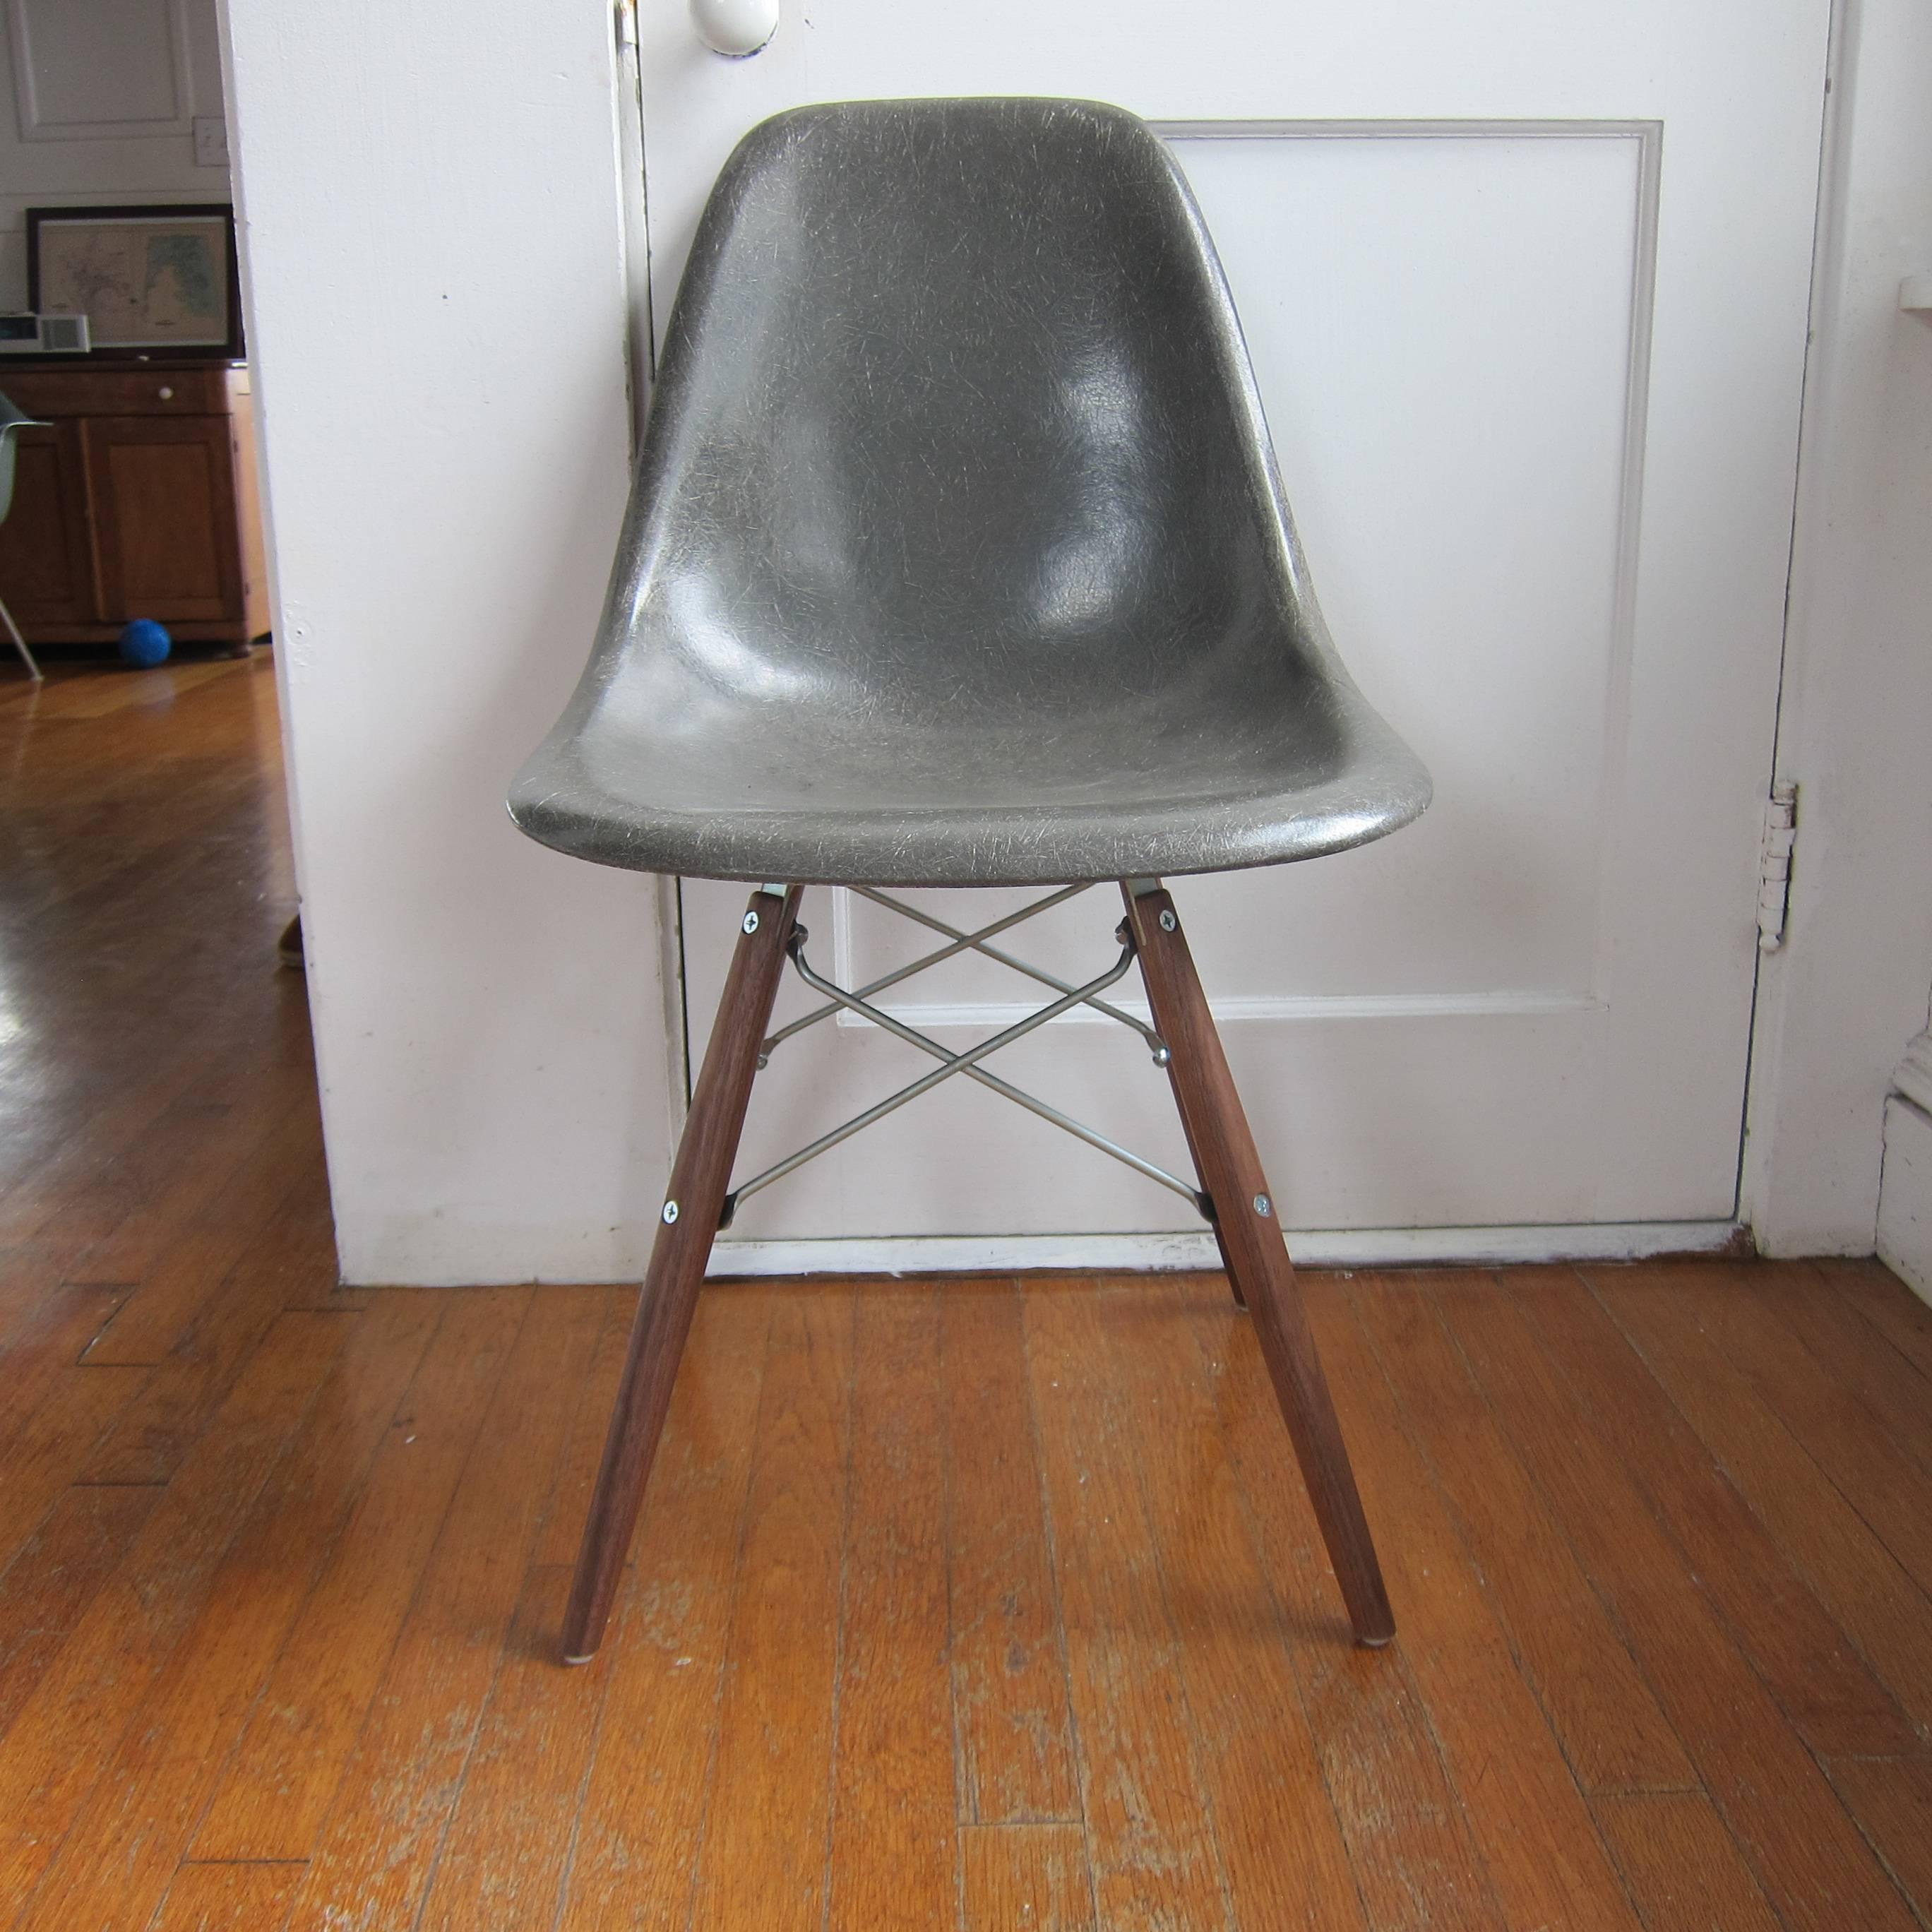 Eight Herman Miller Eames dining chairs in assortment of colors. The bases are new and made in the USA by Modern conscience. Walnut legs, also available in maple. Fiberglass shells free of cracks, holes, or significant wear. Shells have normal wear